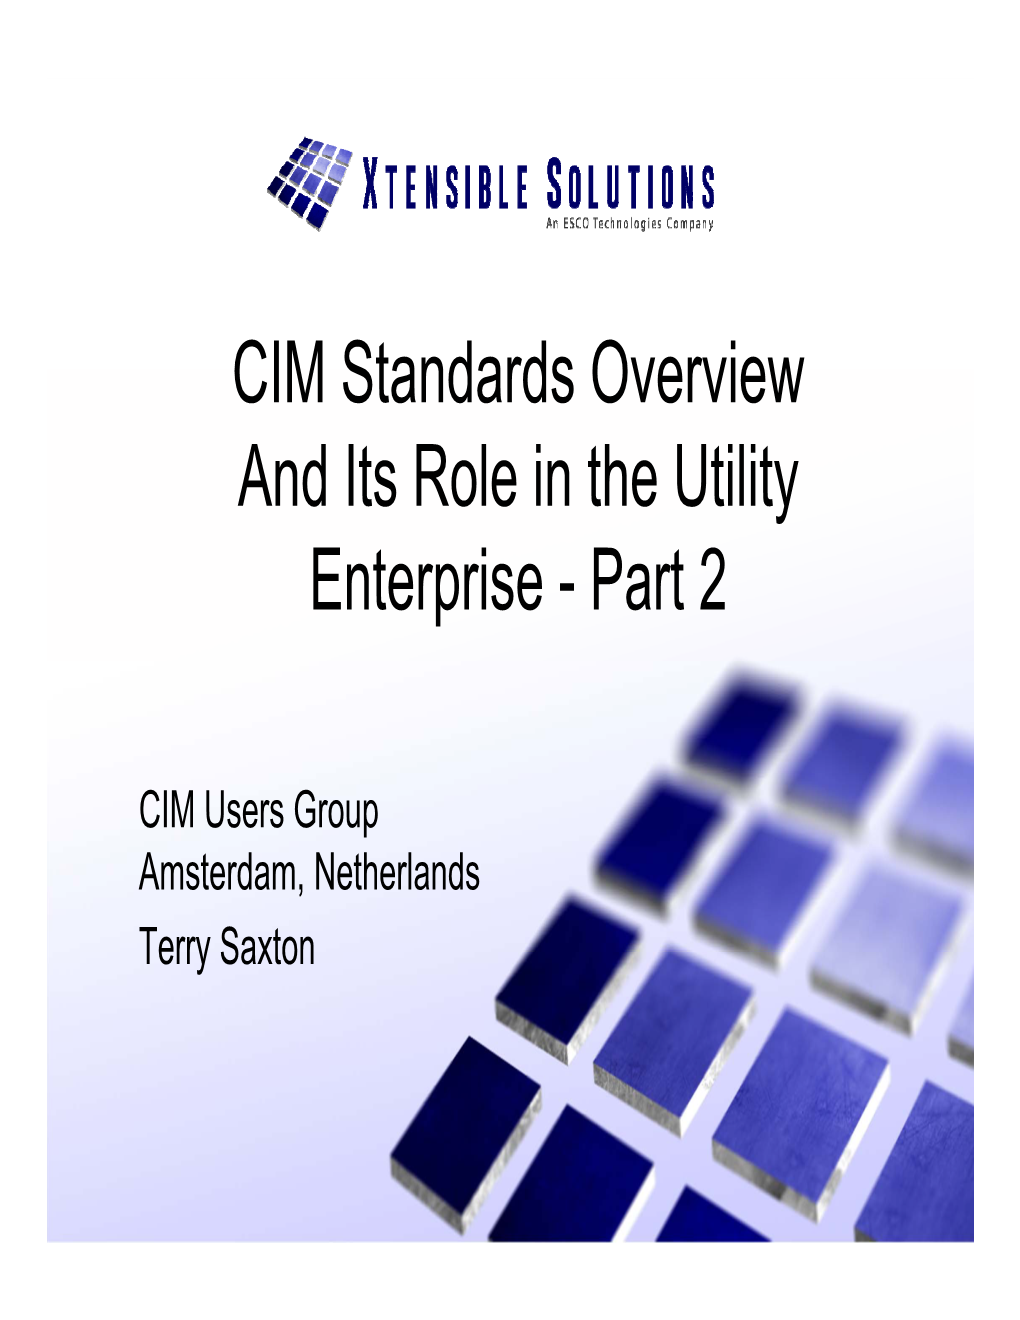 CIM Standards Overview and Its Role in the Utility Enterprise - Part 2